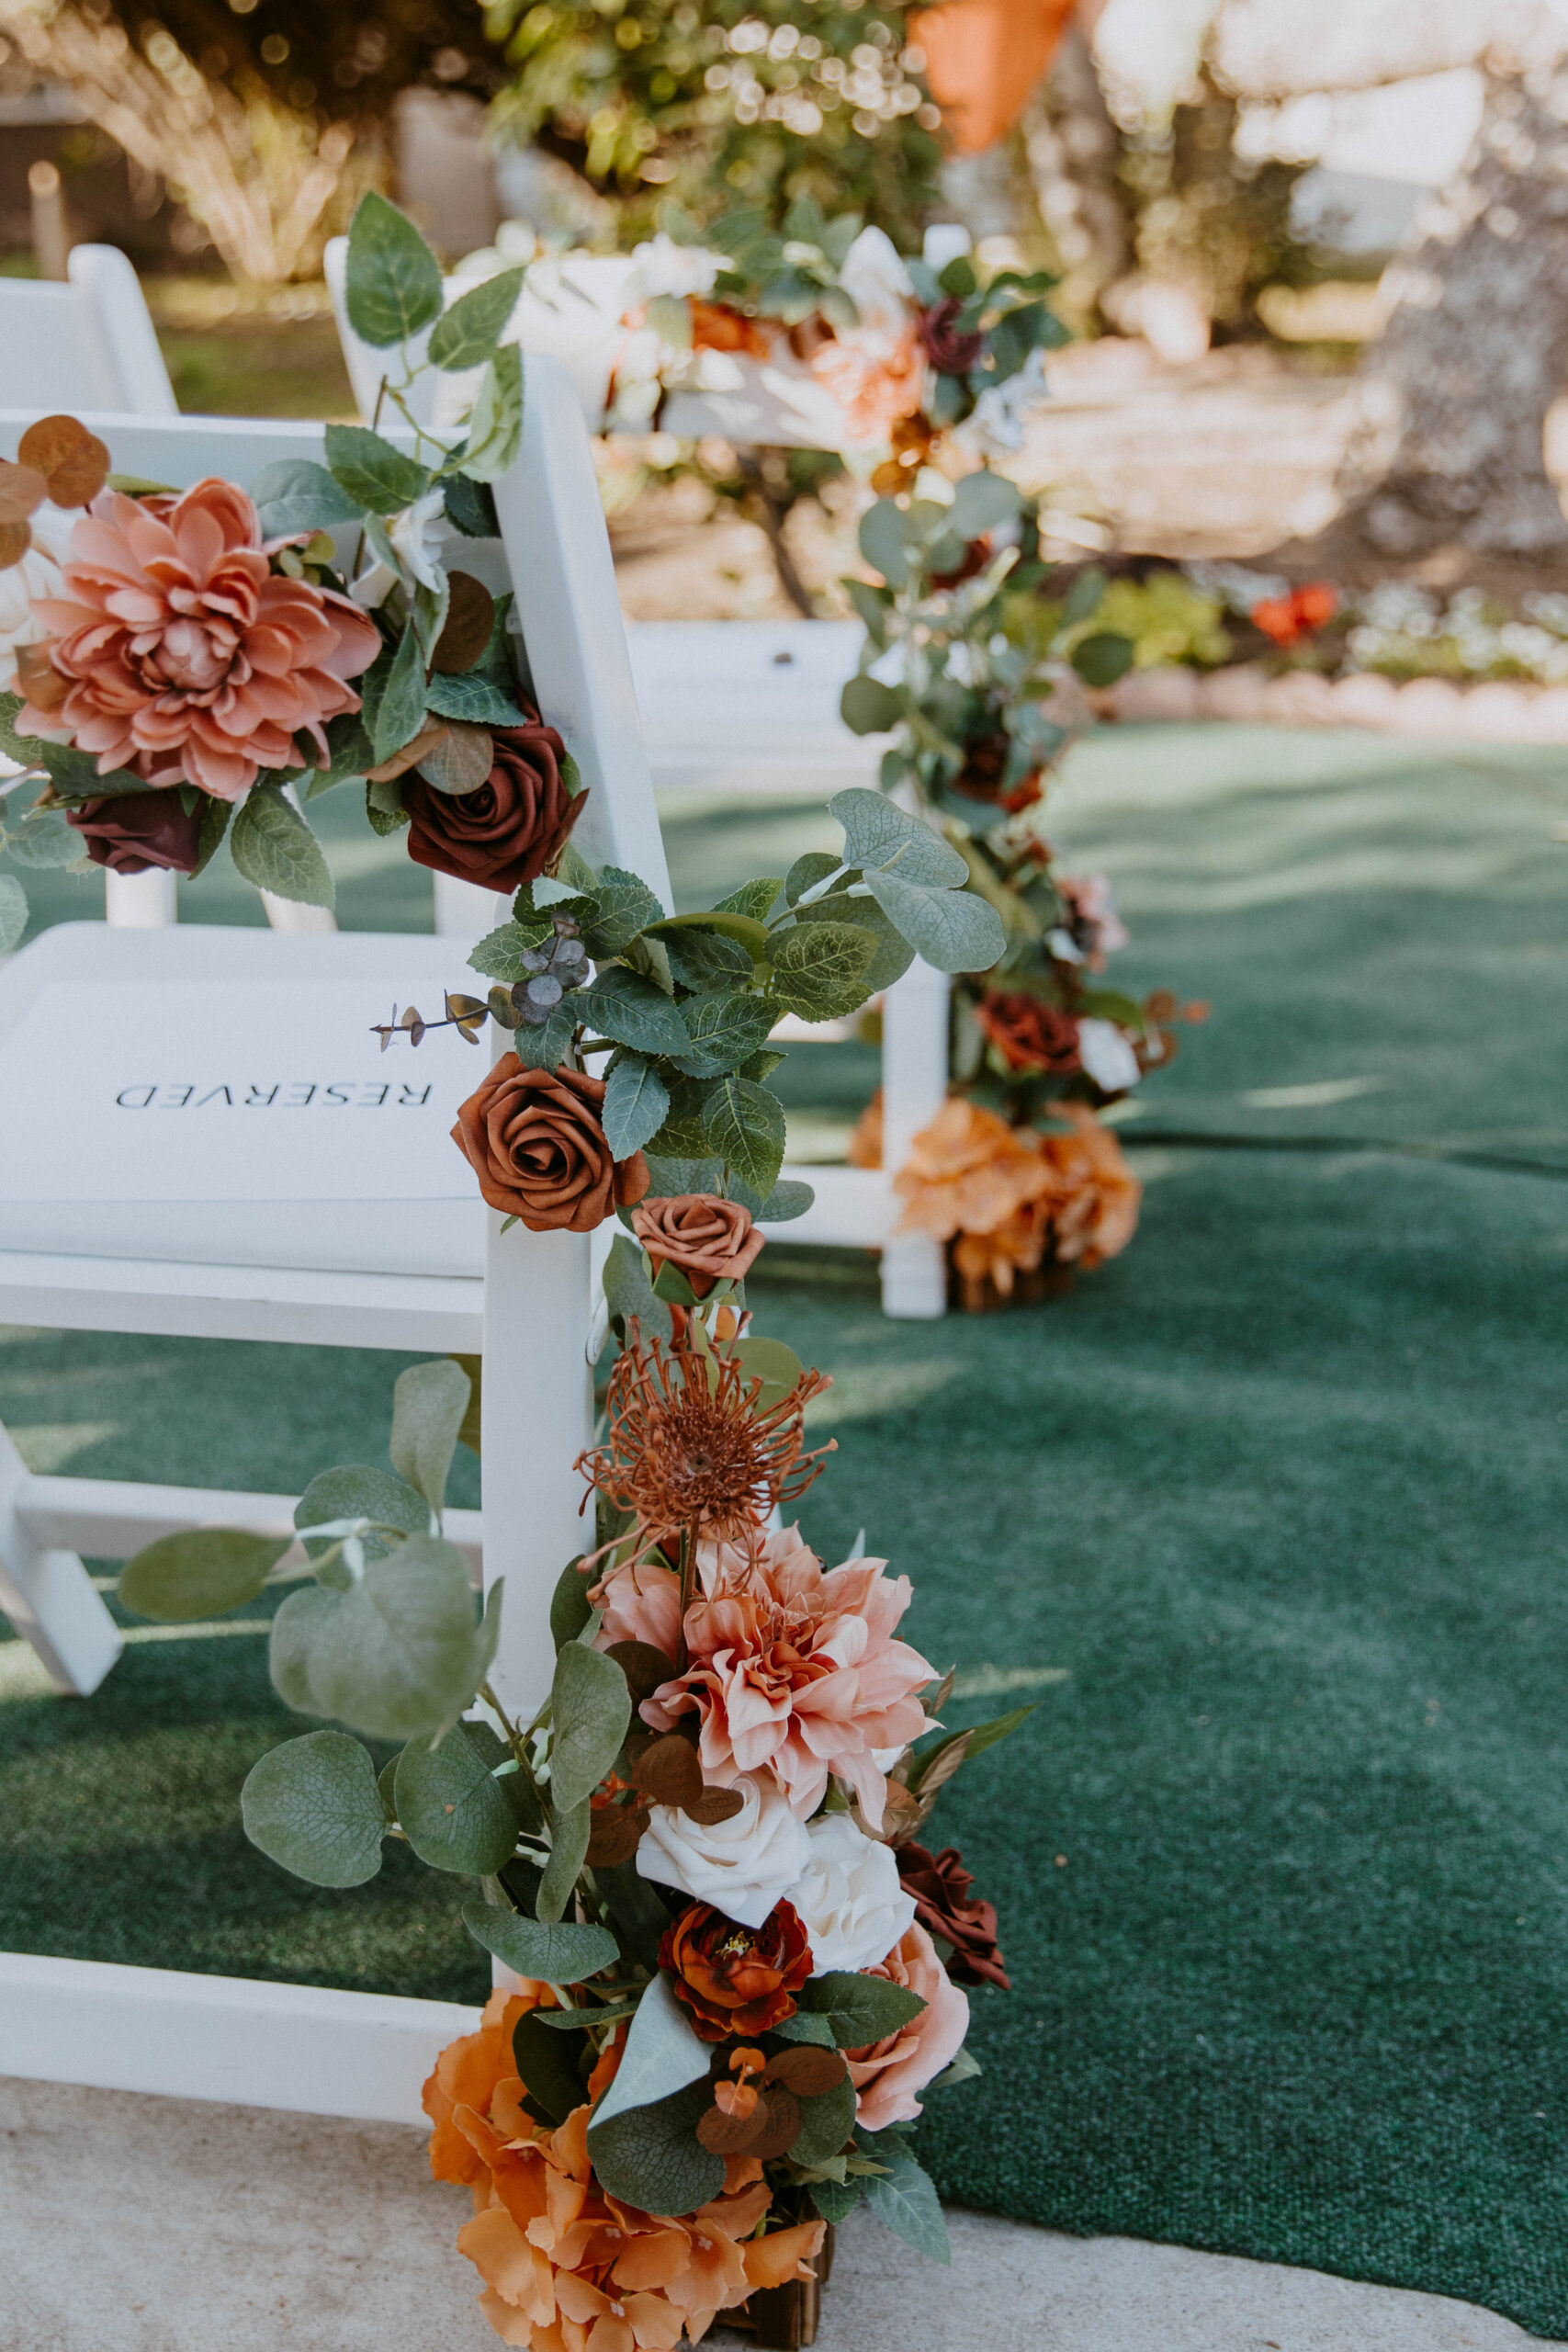 An outdoor setting decorated with fabric and flowers for an intimate backyard wedding.